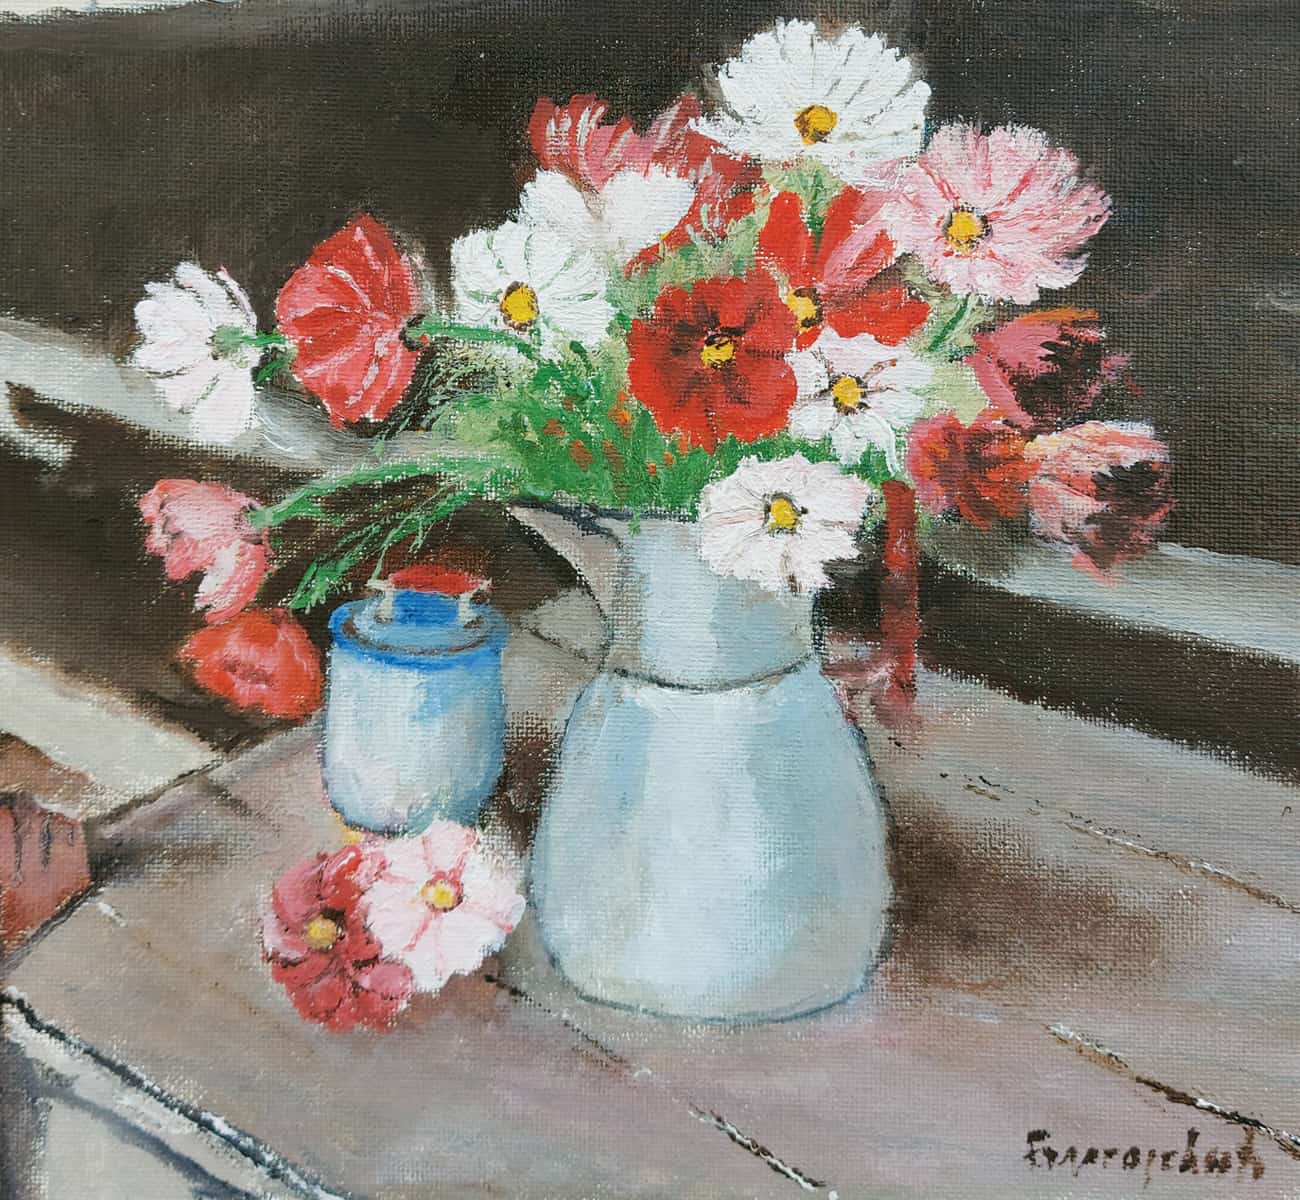 An oil painting depicts an old aluminum milk pitcher with a red handle holding a fresh-cut cosmos bouquet standing on a rustic table.